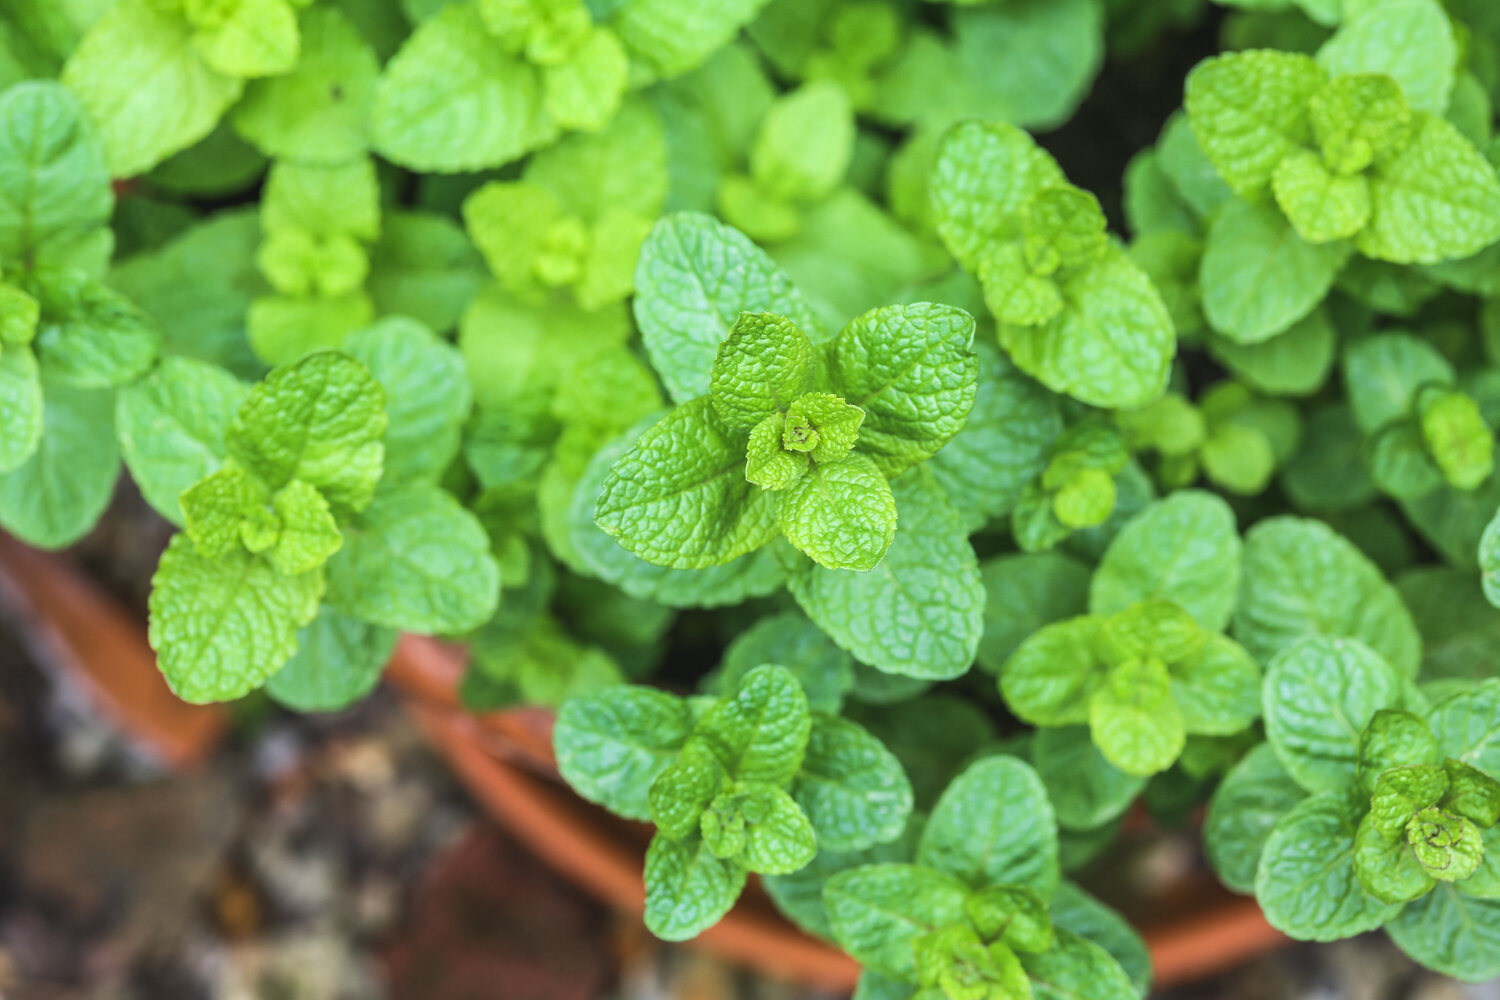 The best way to overwinter your mint plants